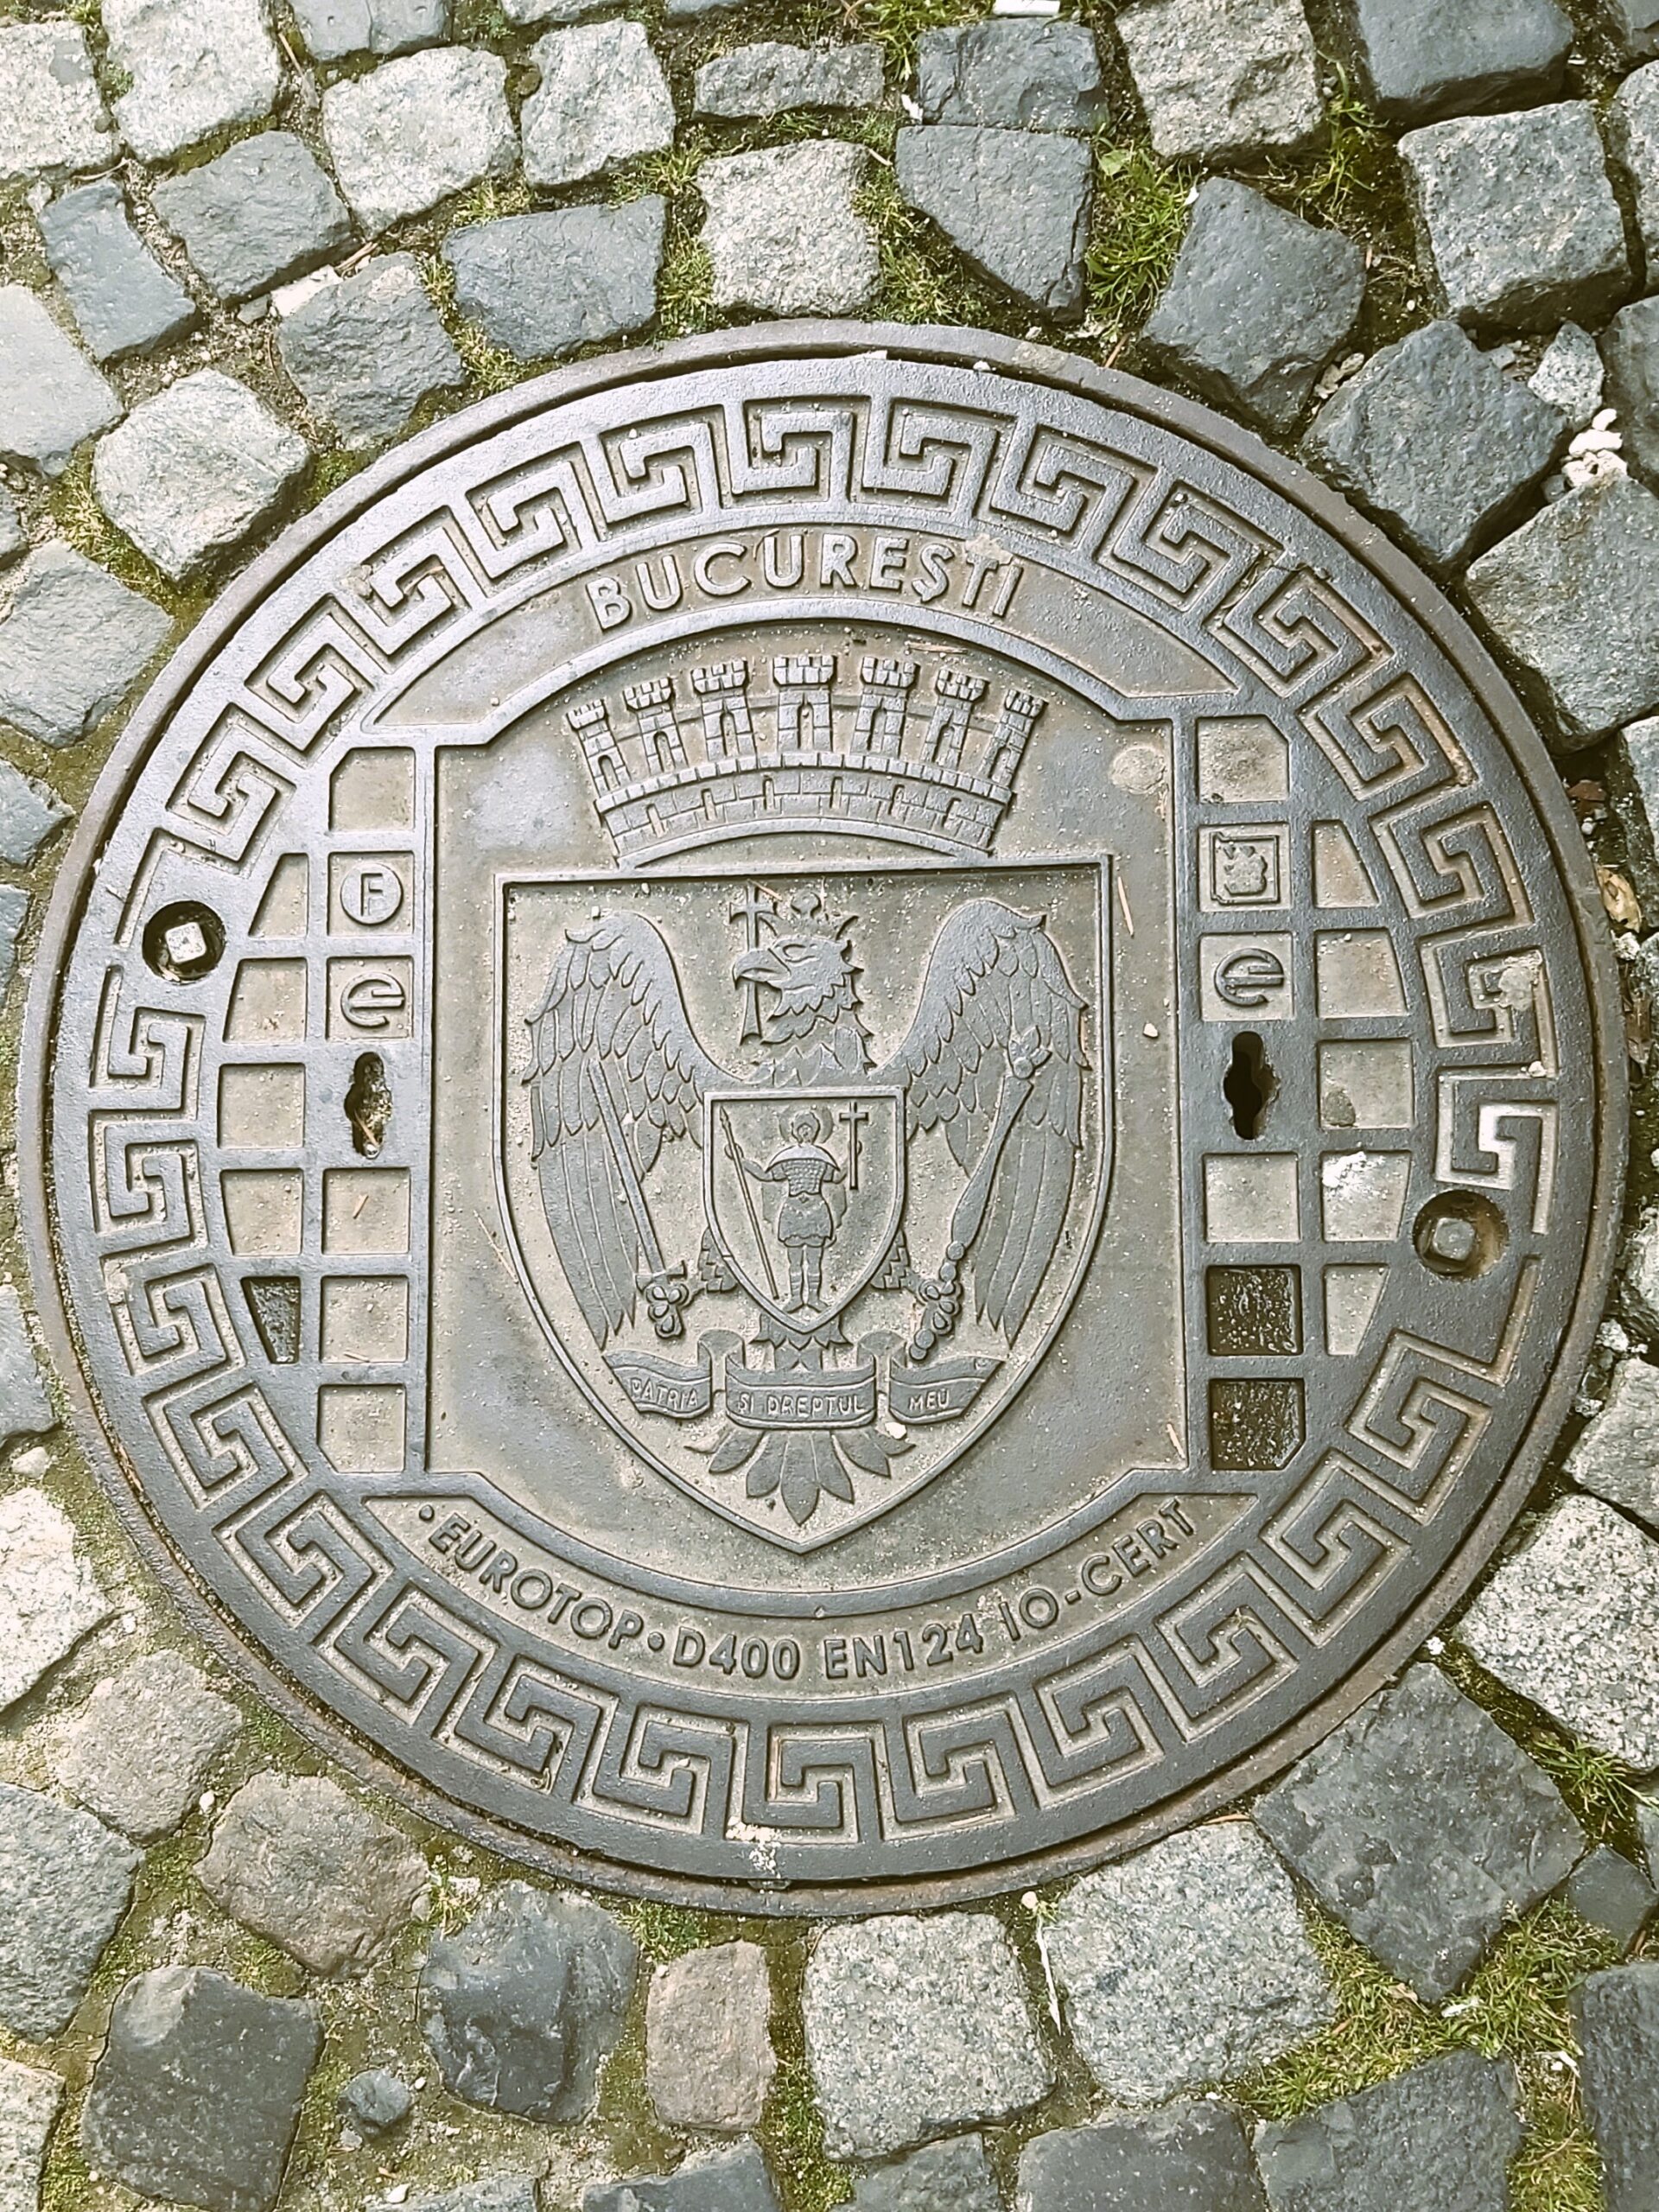 A drain cover with eagle, crown and saint on it in București, Romania